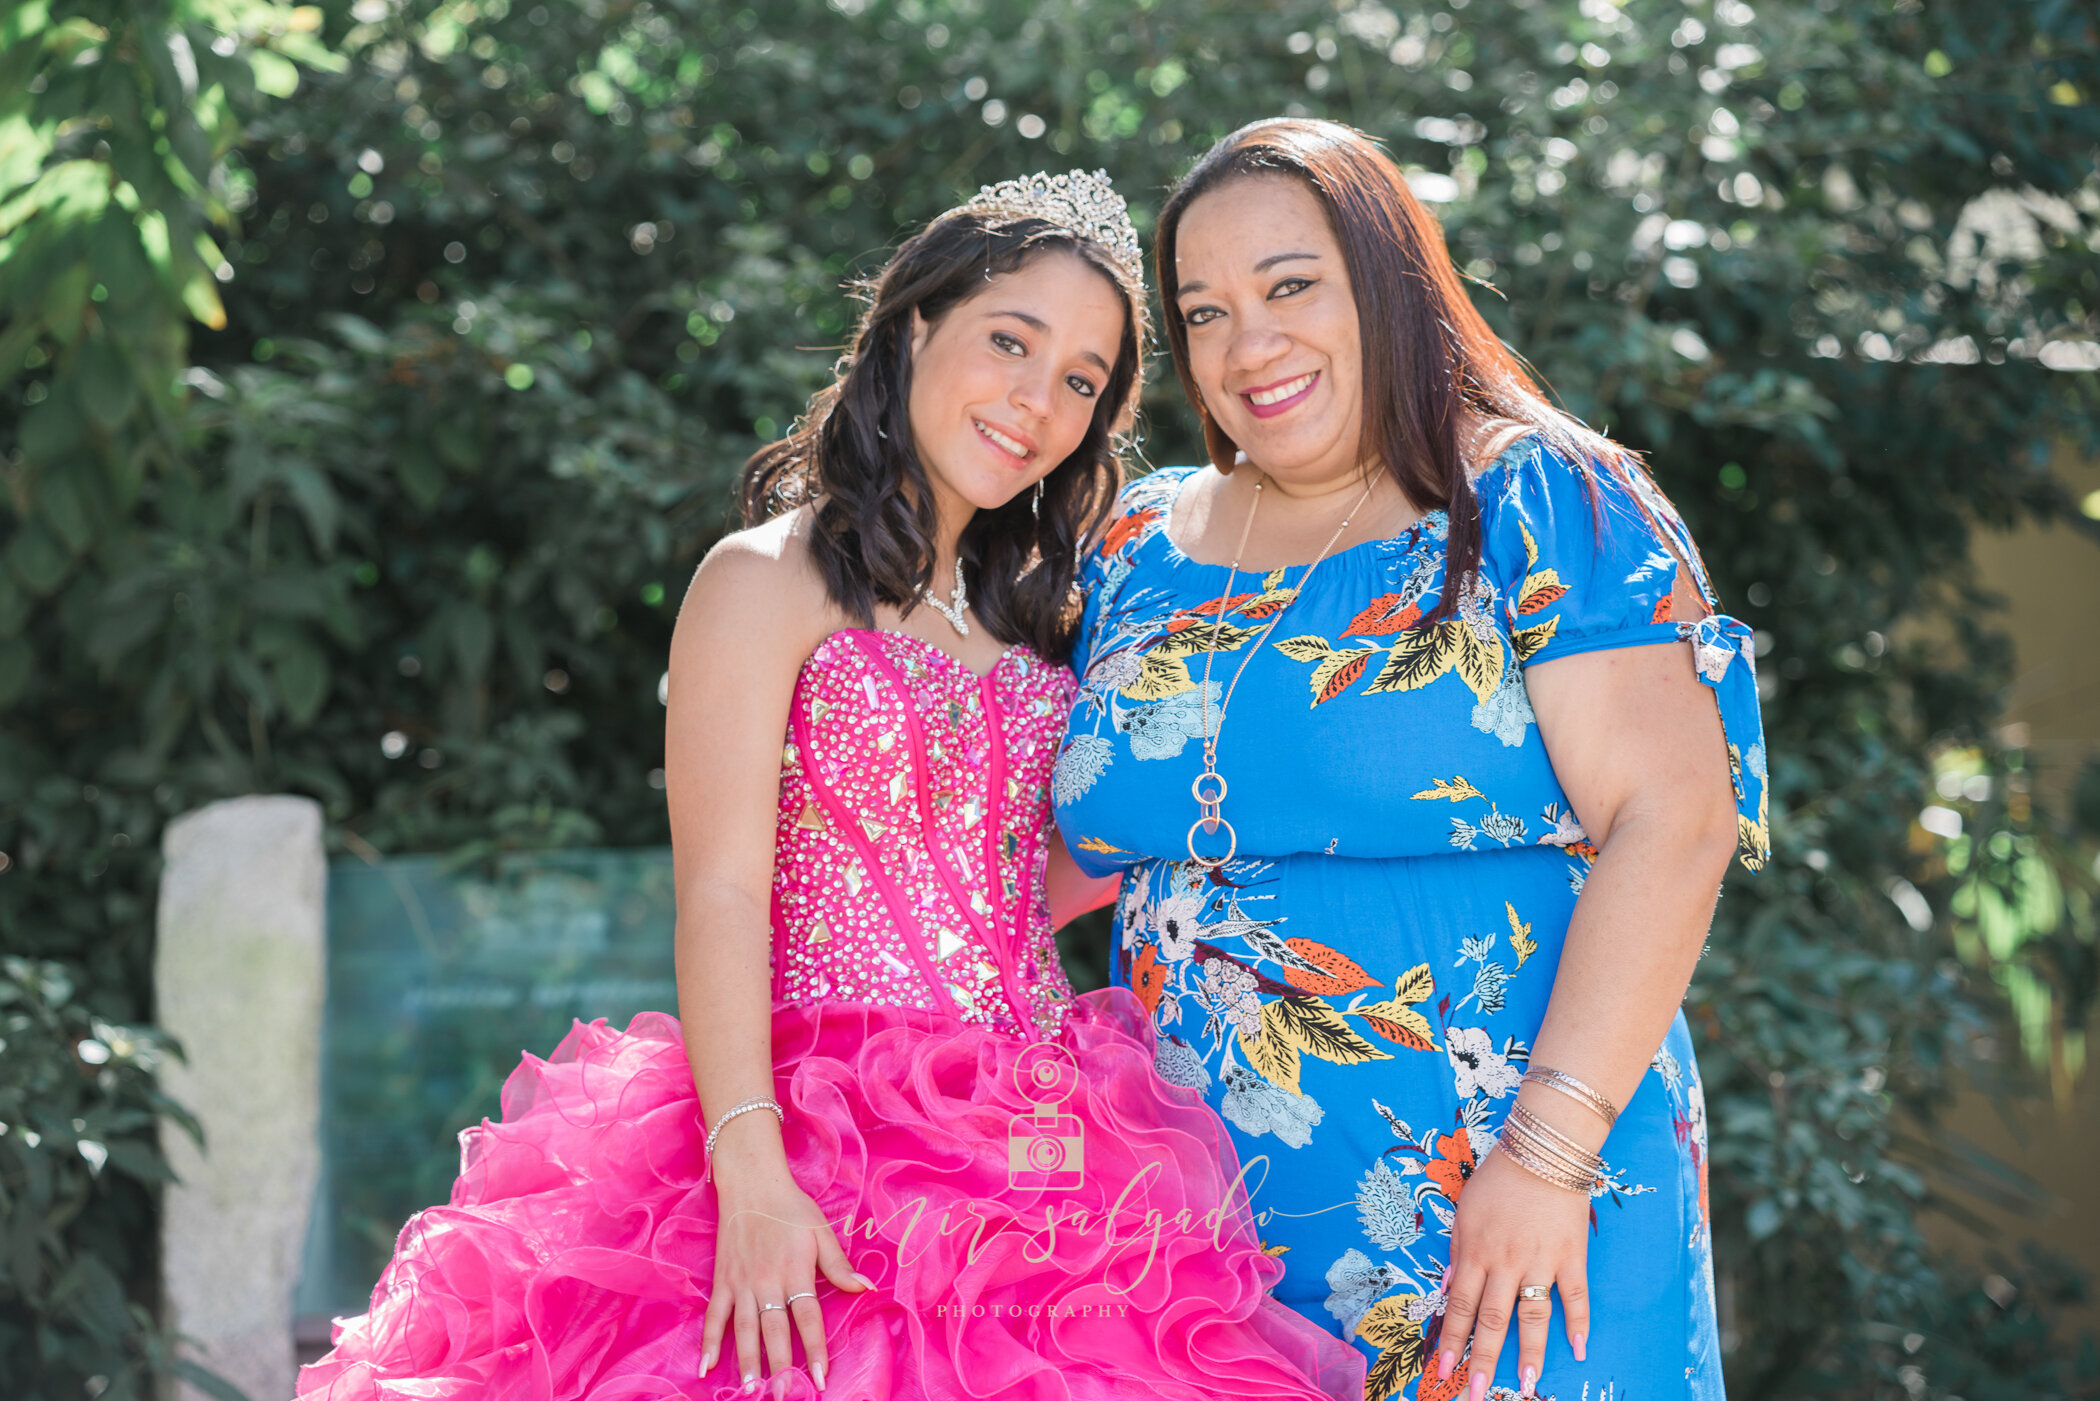 sweet-15-dress, florida-quinceanera, florida-quince, quince-party, padrinos, mom-and-daughter-portrait, mom-and-daughter-photos